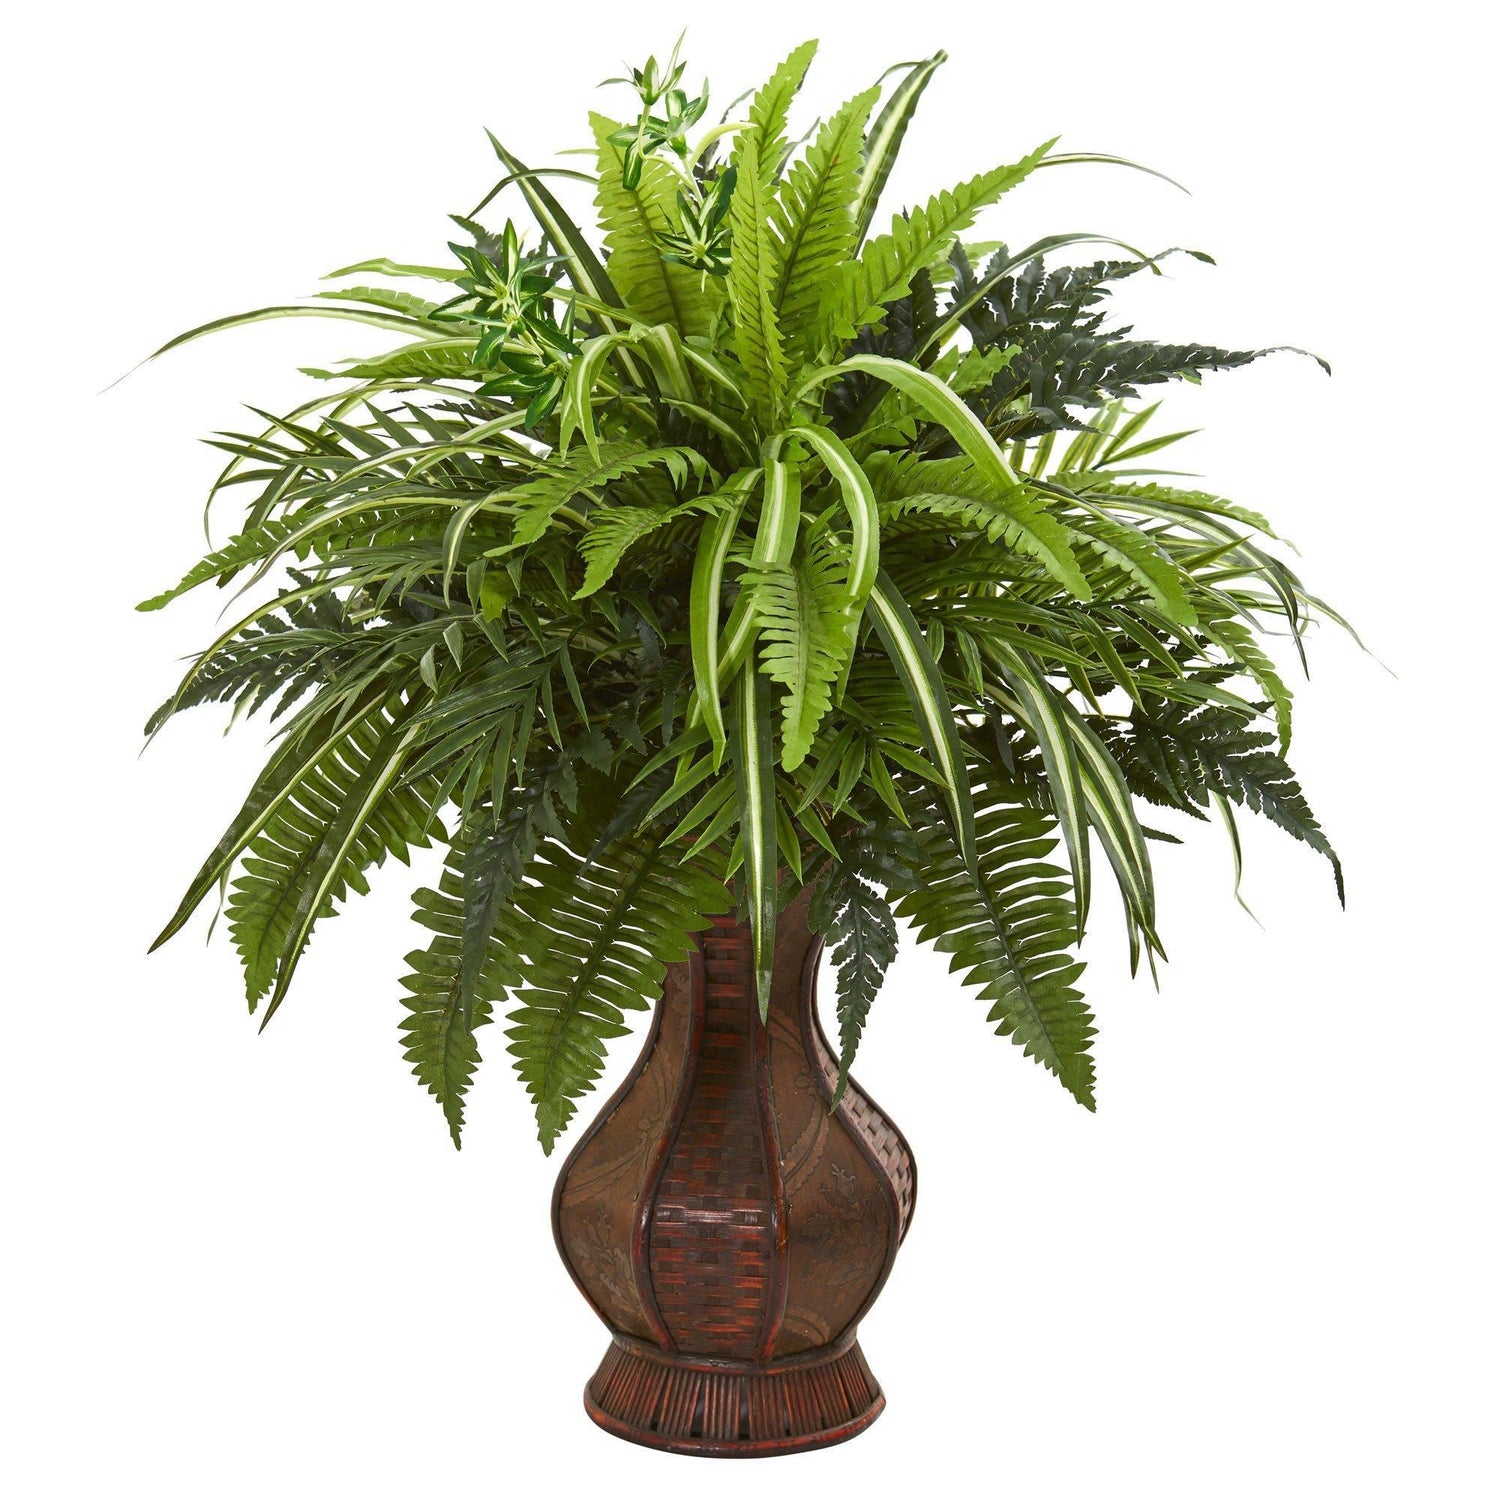 26” Mixed Greens and Fern Artificial Plant in Decorative Planter